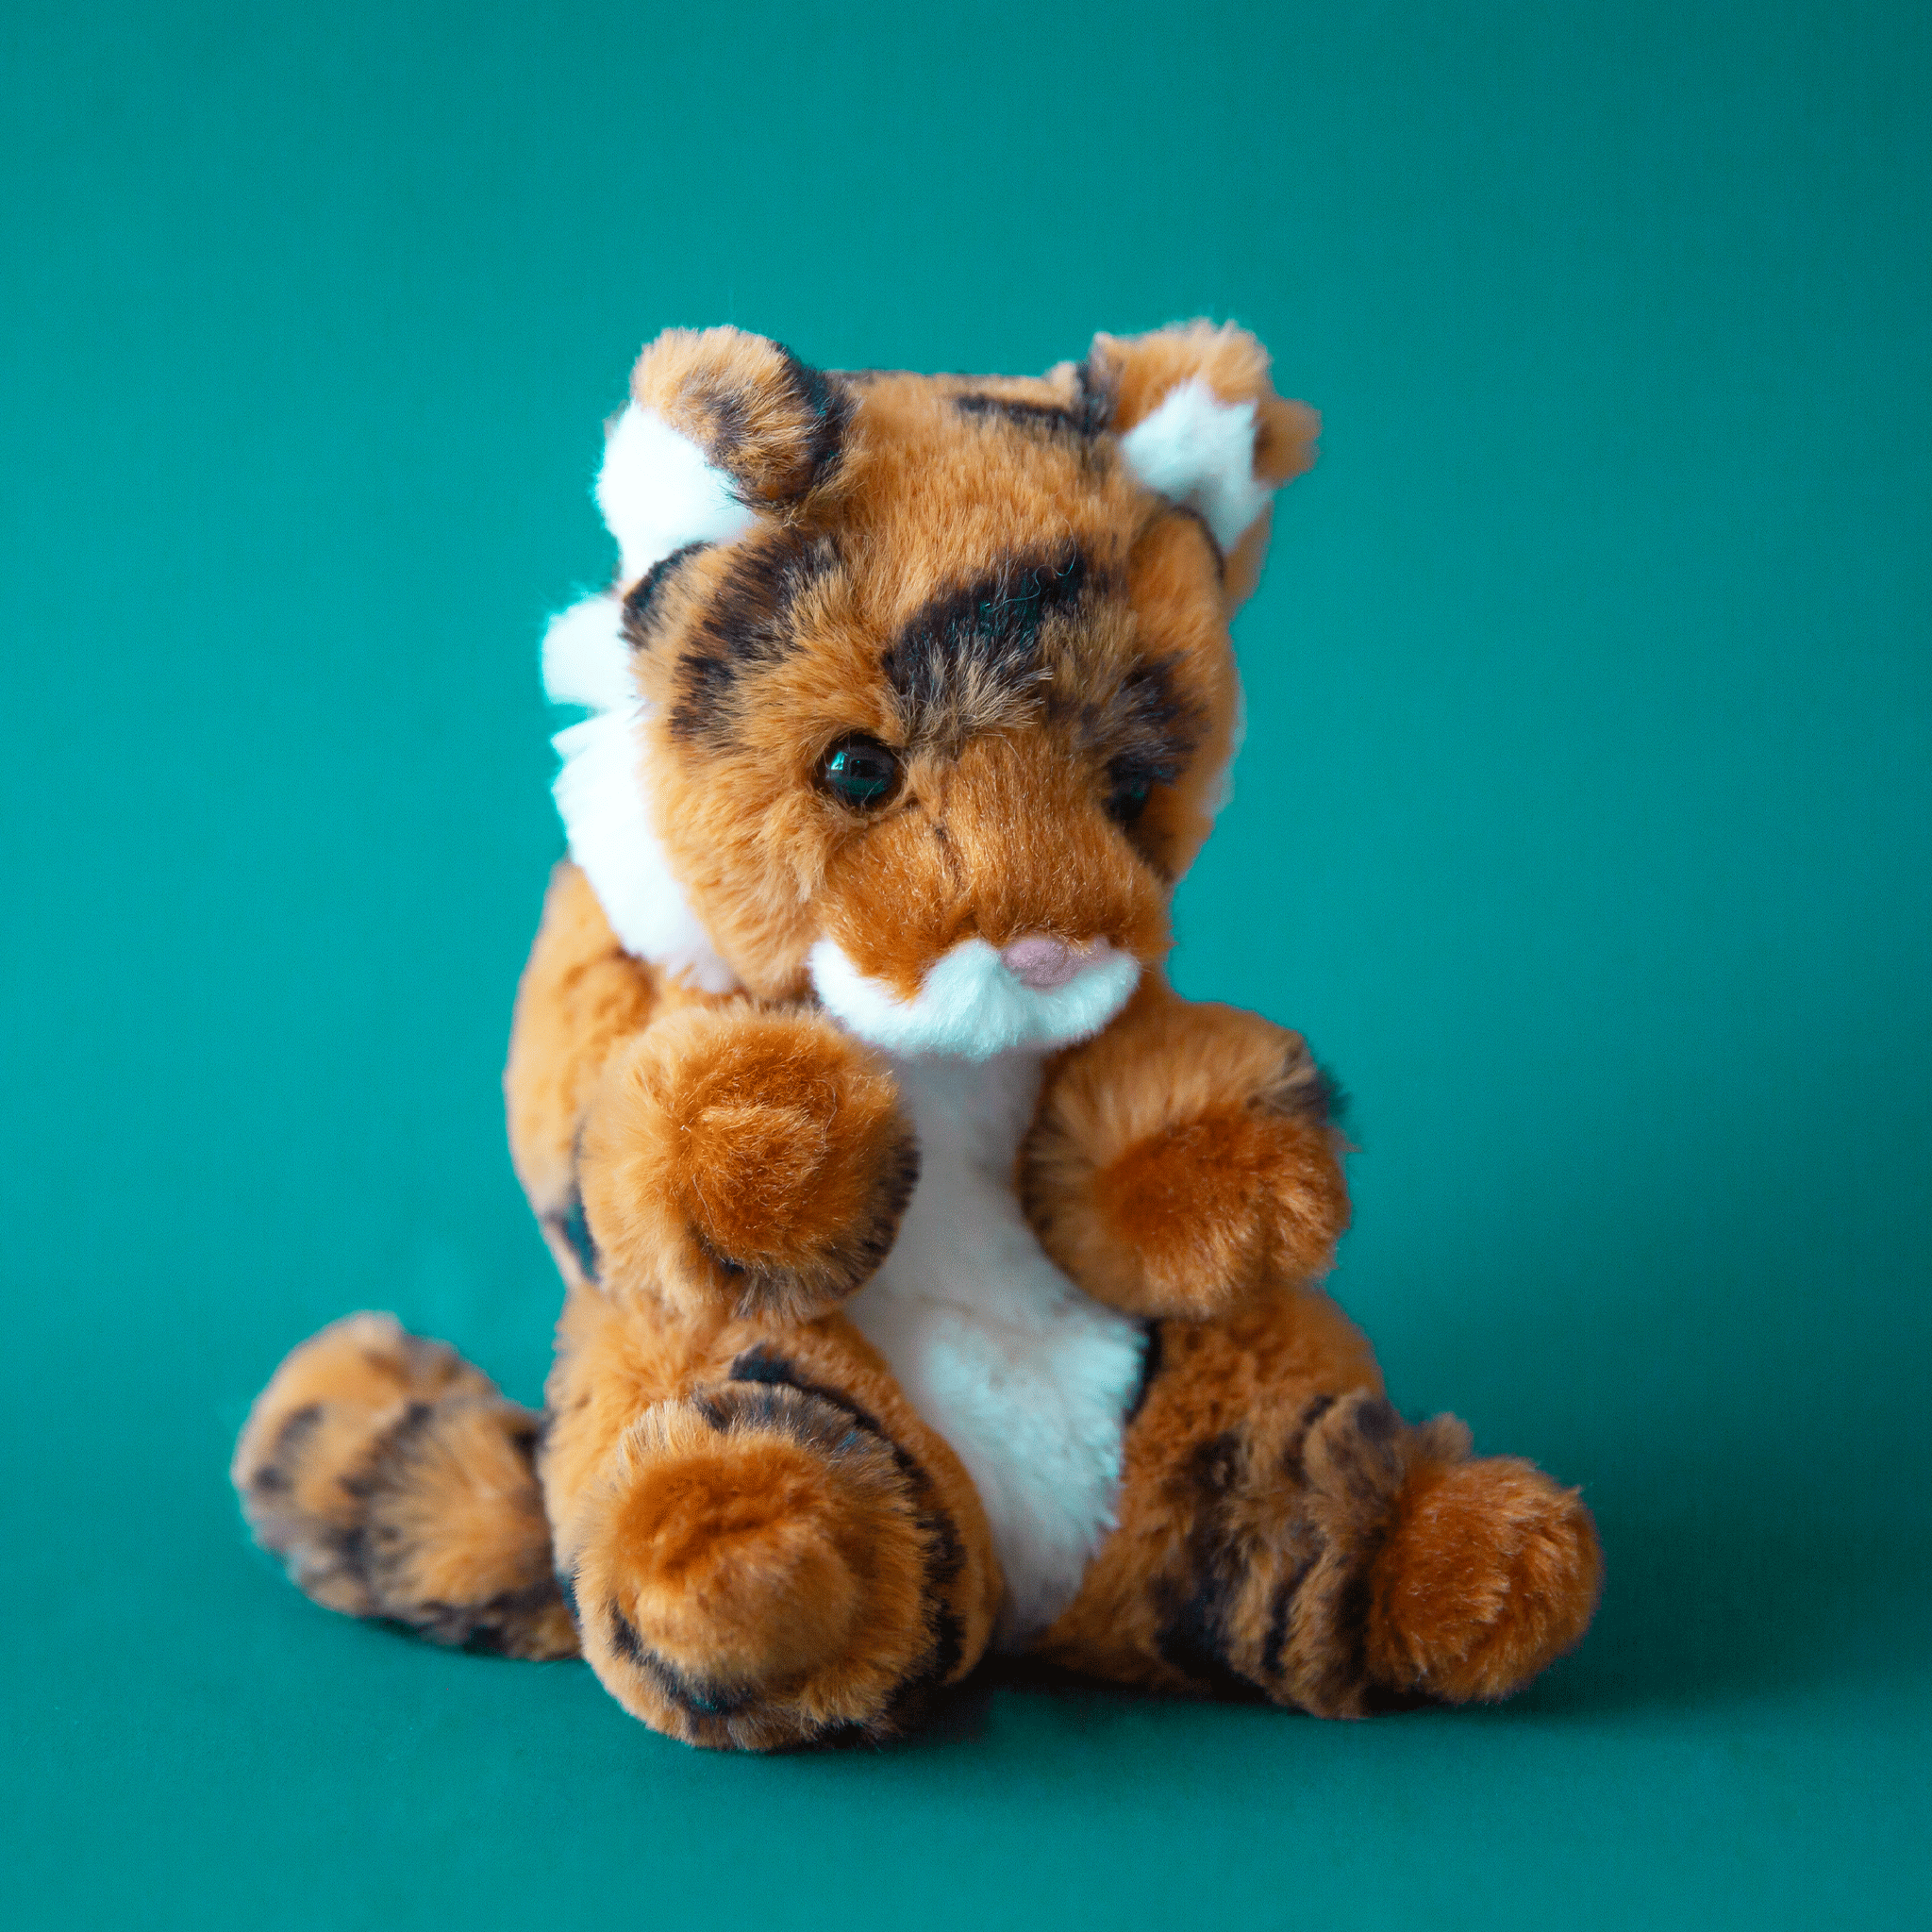 On a blue background is a small tiger stuffed animal toy with black stripes and an adorable face.